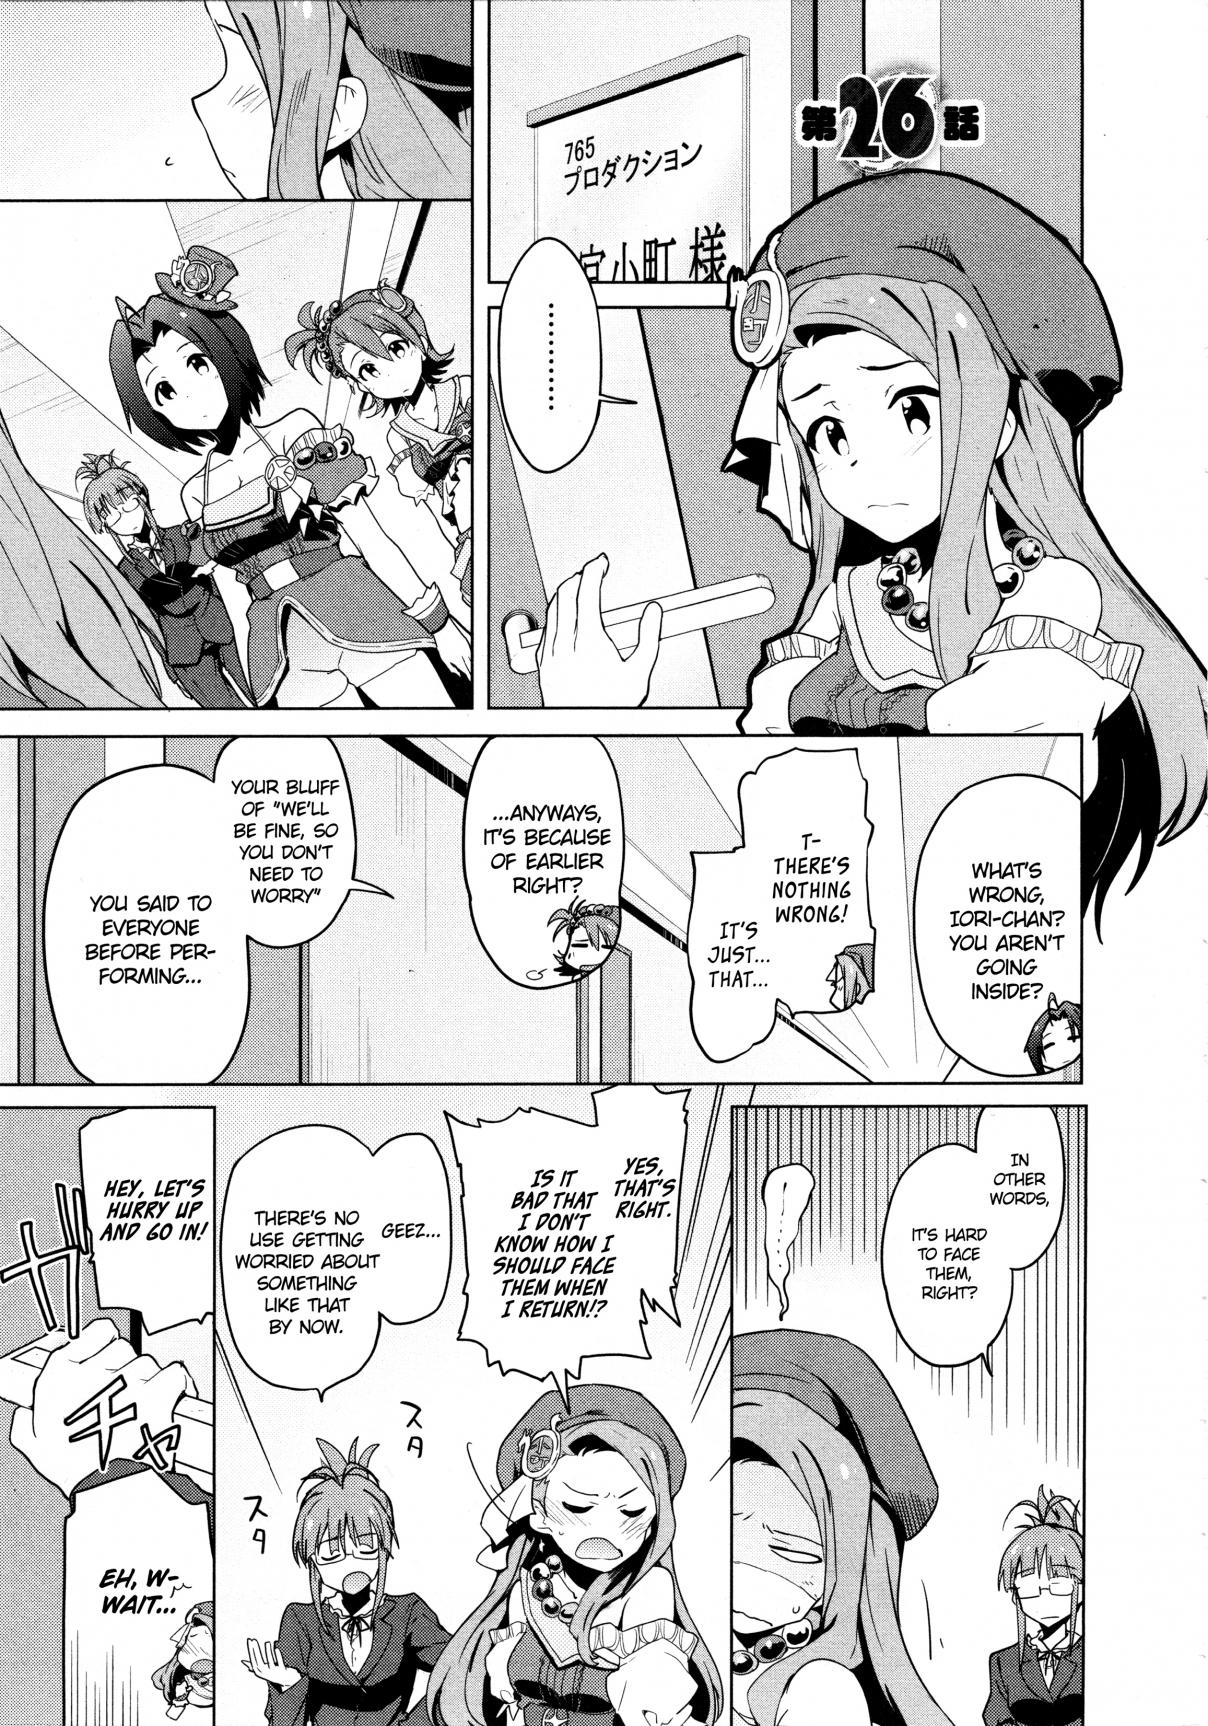 THE iDOLM@STER 2 The world is all one!! Vol. 4 Ch. 26 My Best Unit